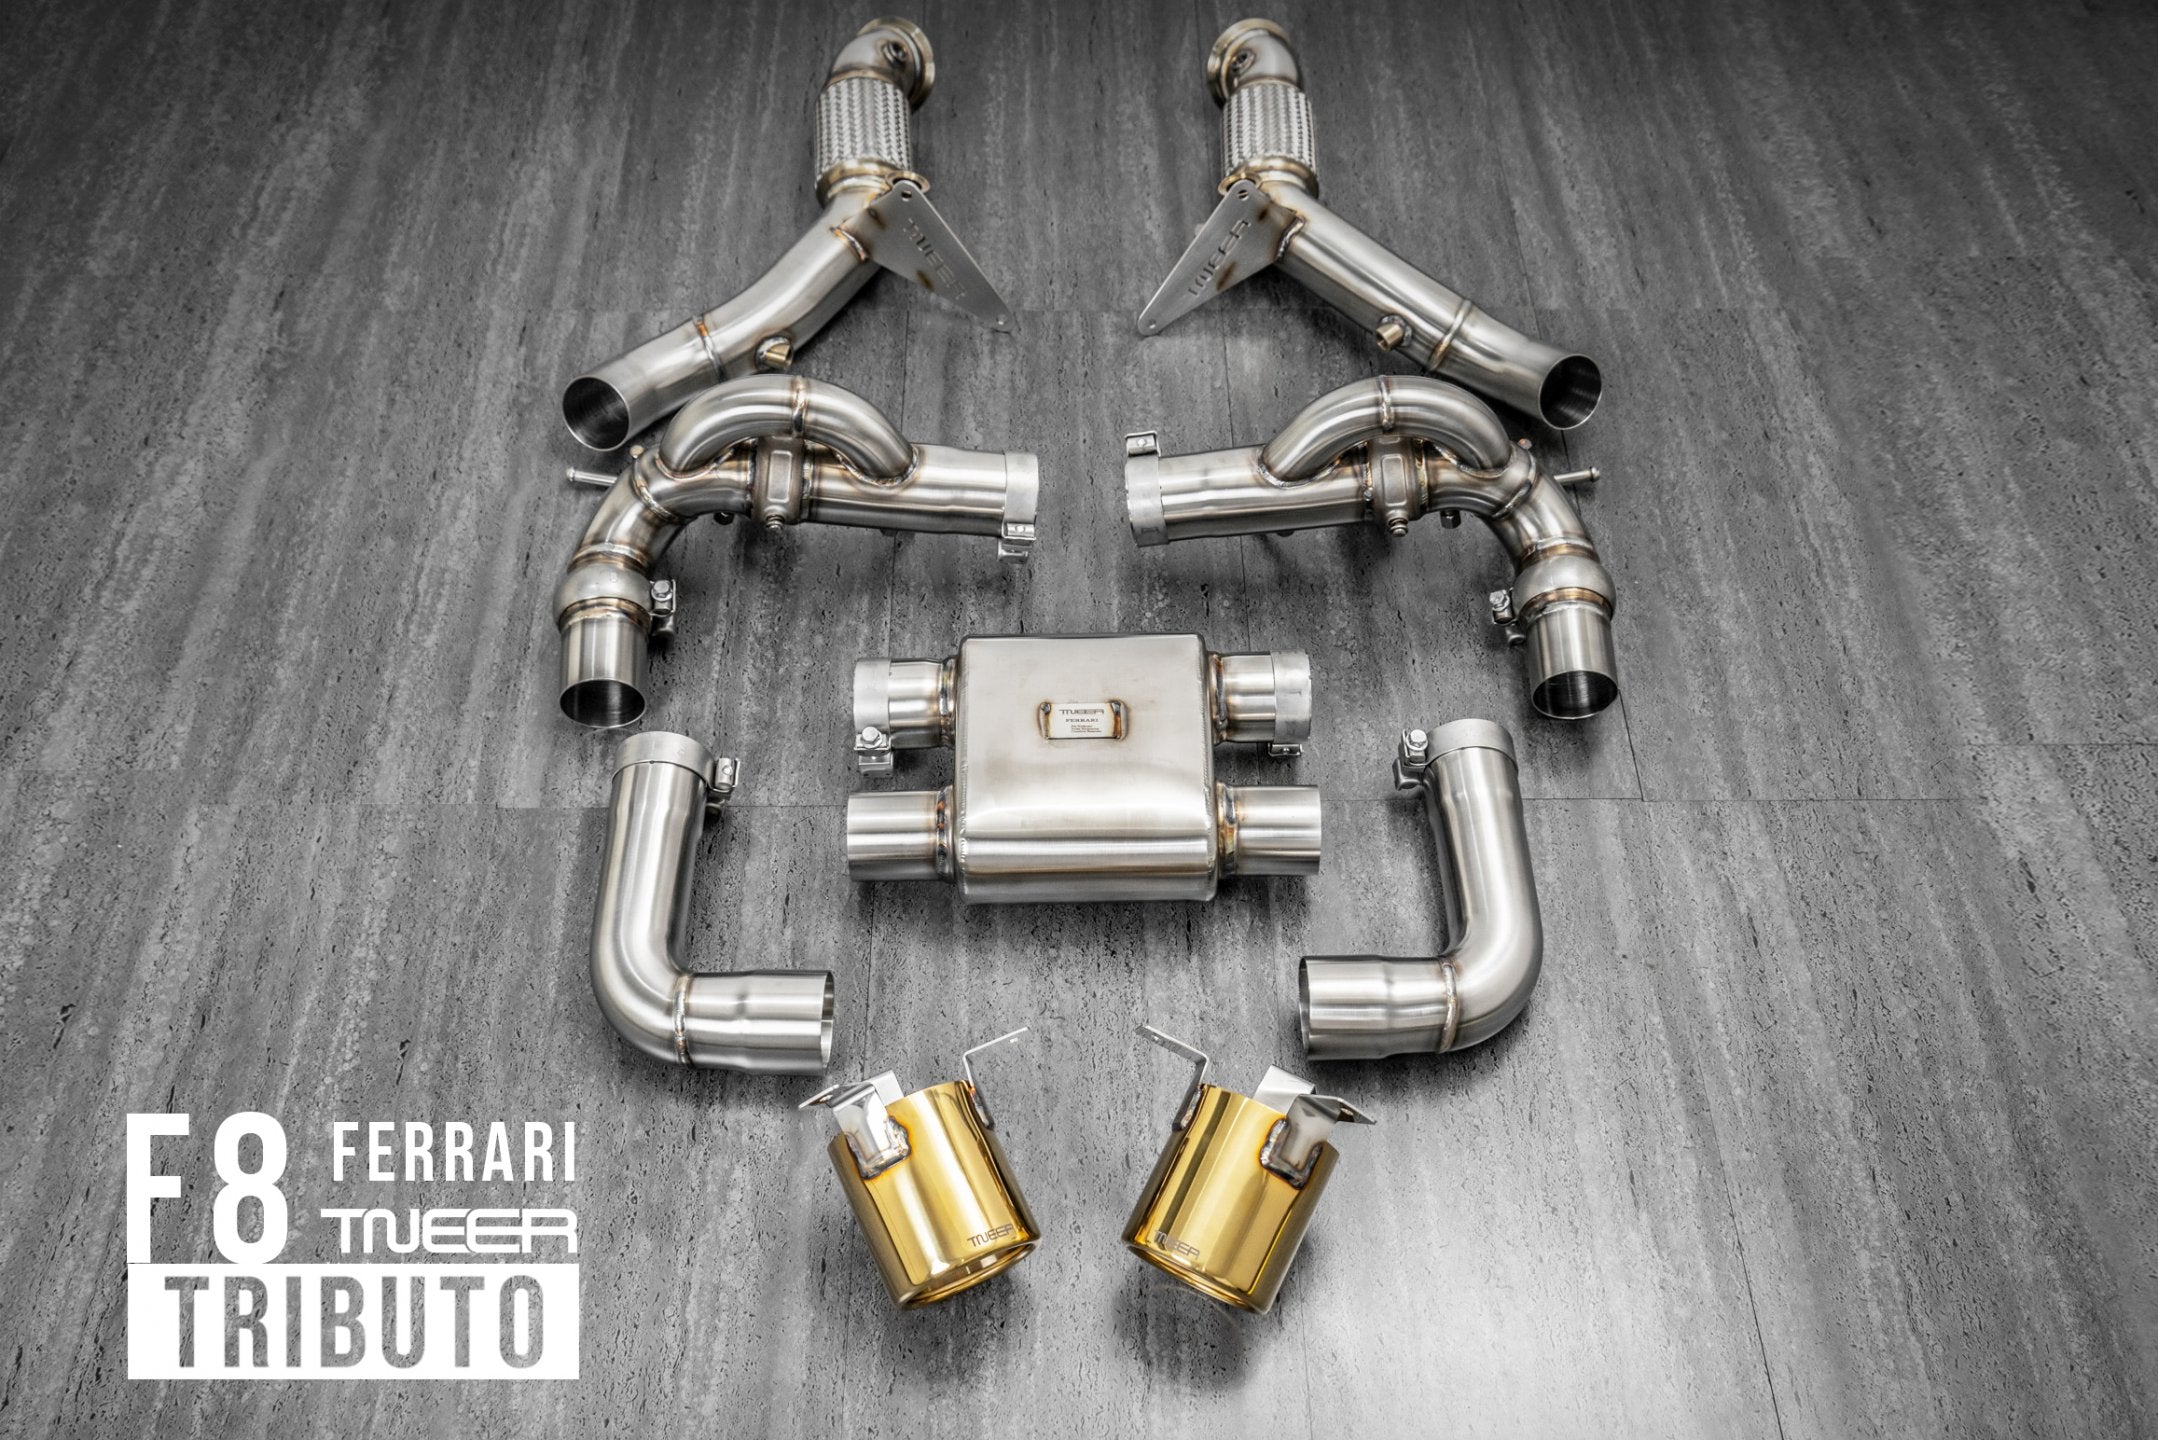 TNEER flap exhaust system for the Ferrari F8 Tributo 